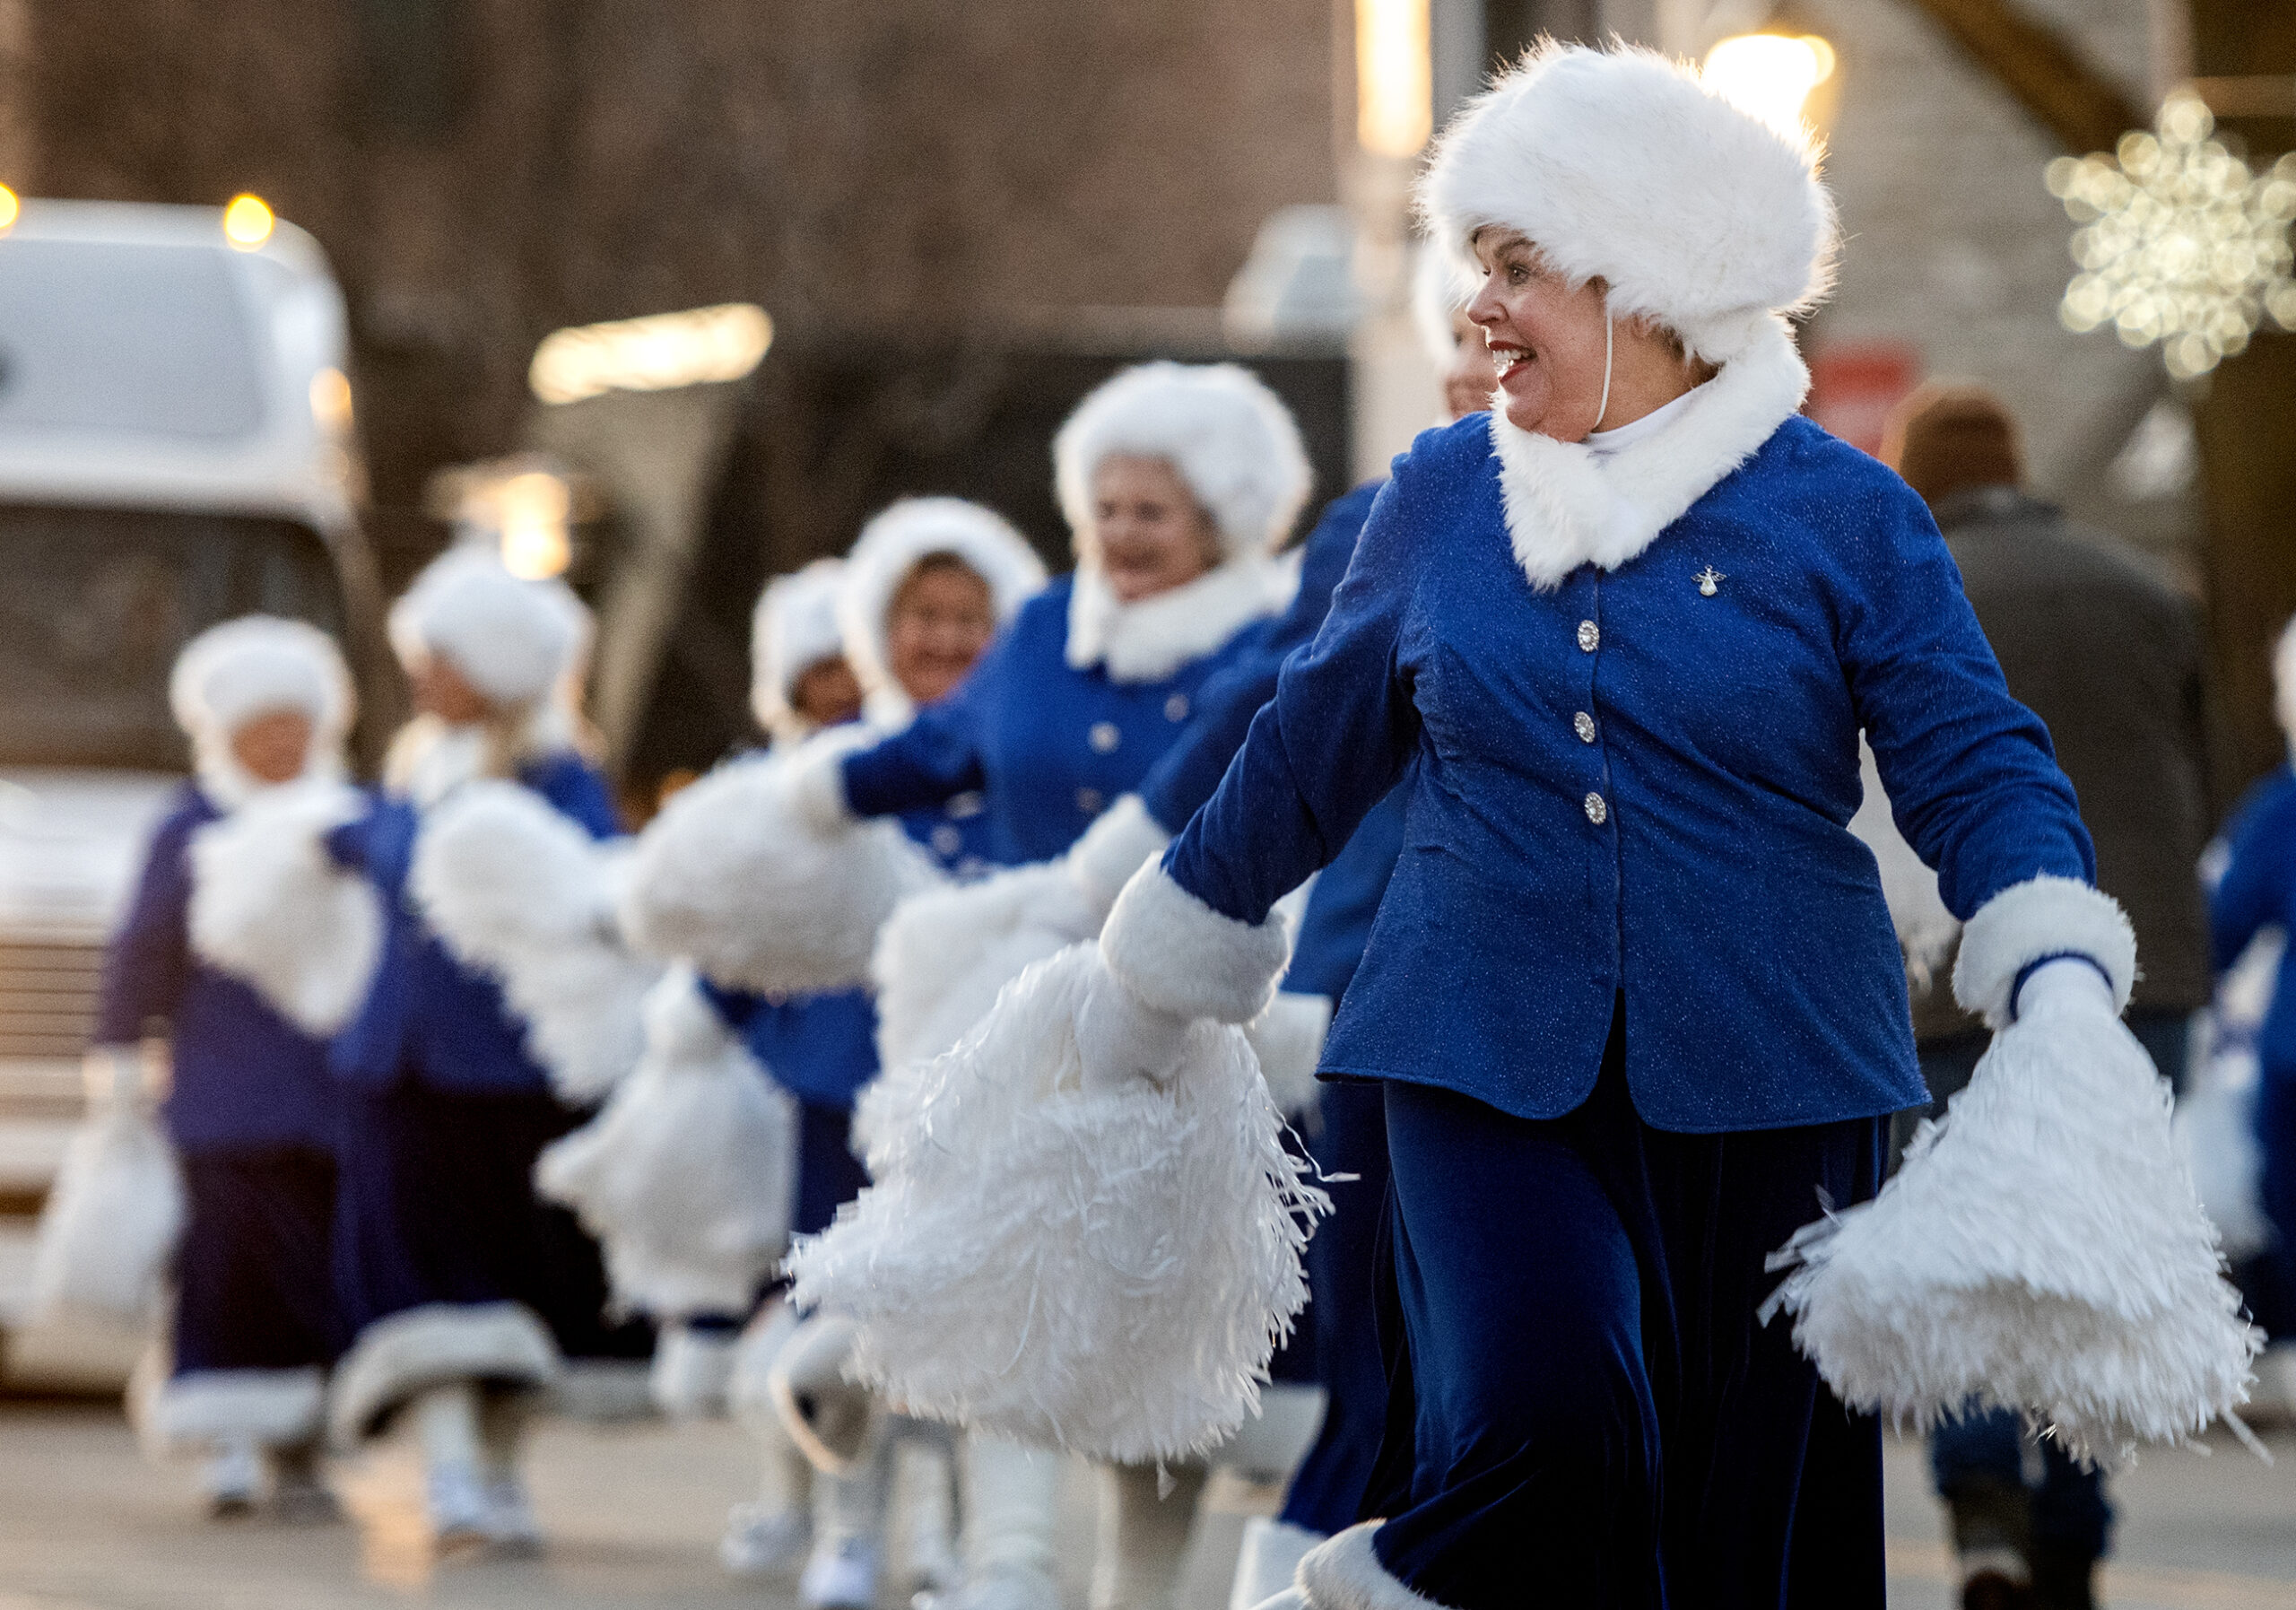 Women in blue coats perform with white poms. They dance together and smile at the crowd.